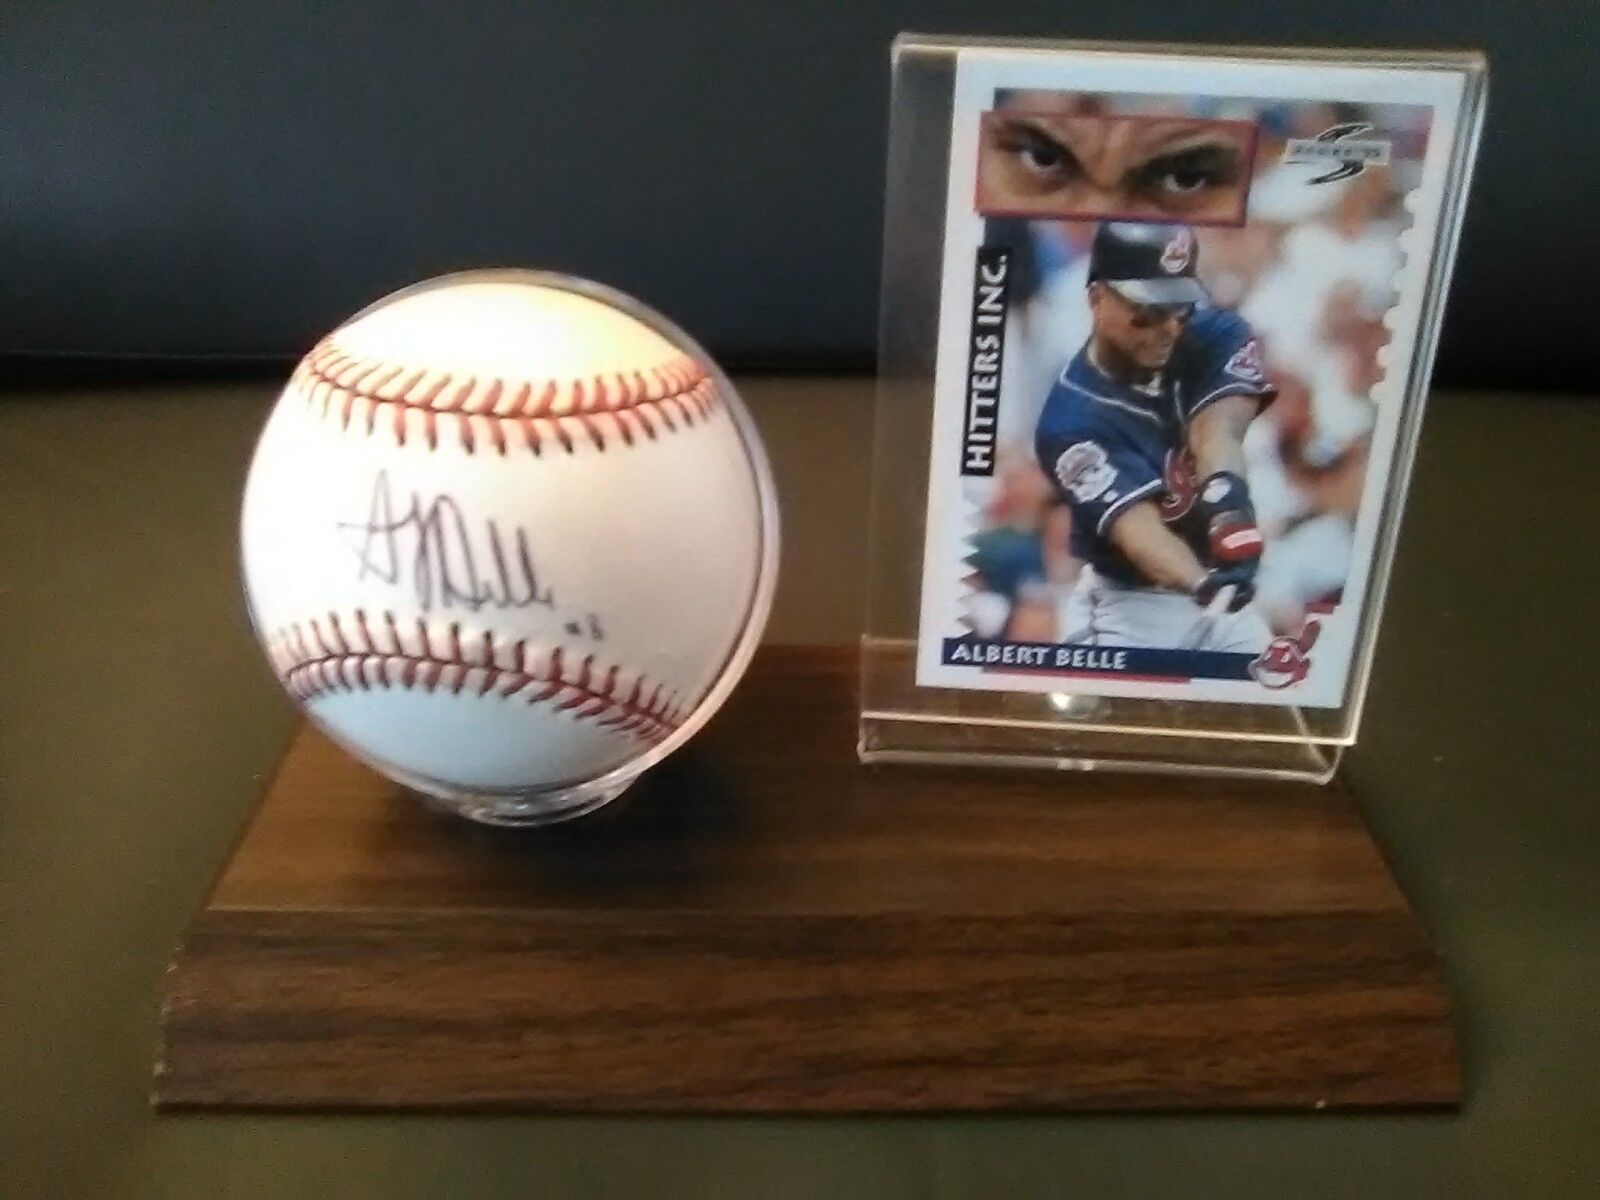 ALBERT BELLE Signed Rawlings American League Baseball Autograph on Display Stand